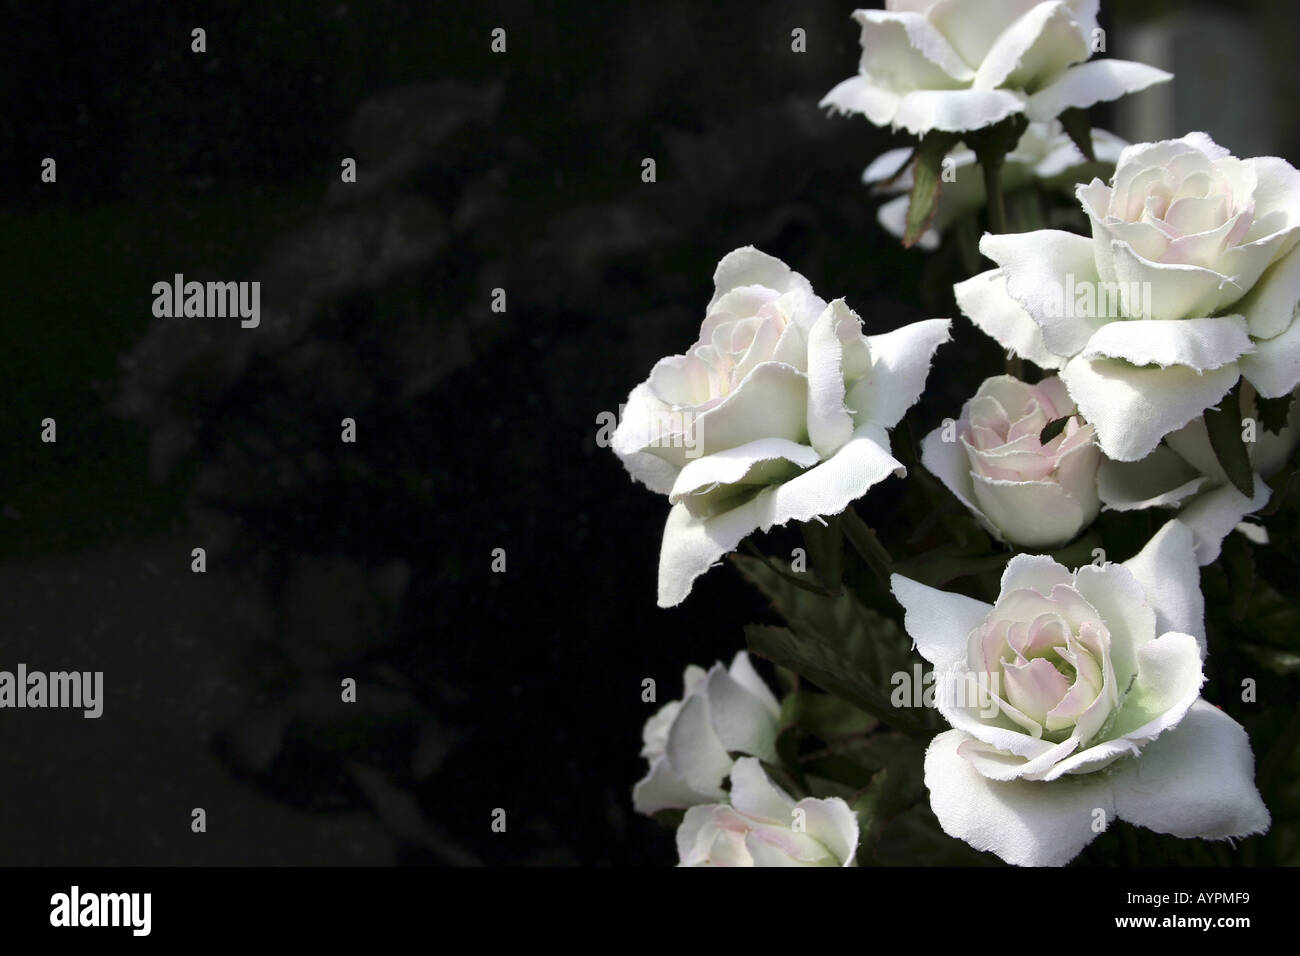 High angle view of white roses Stock Photo